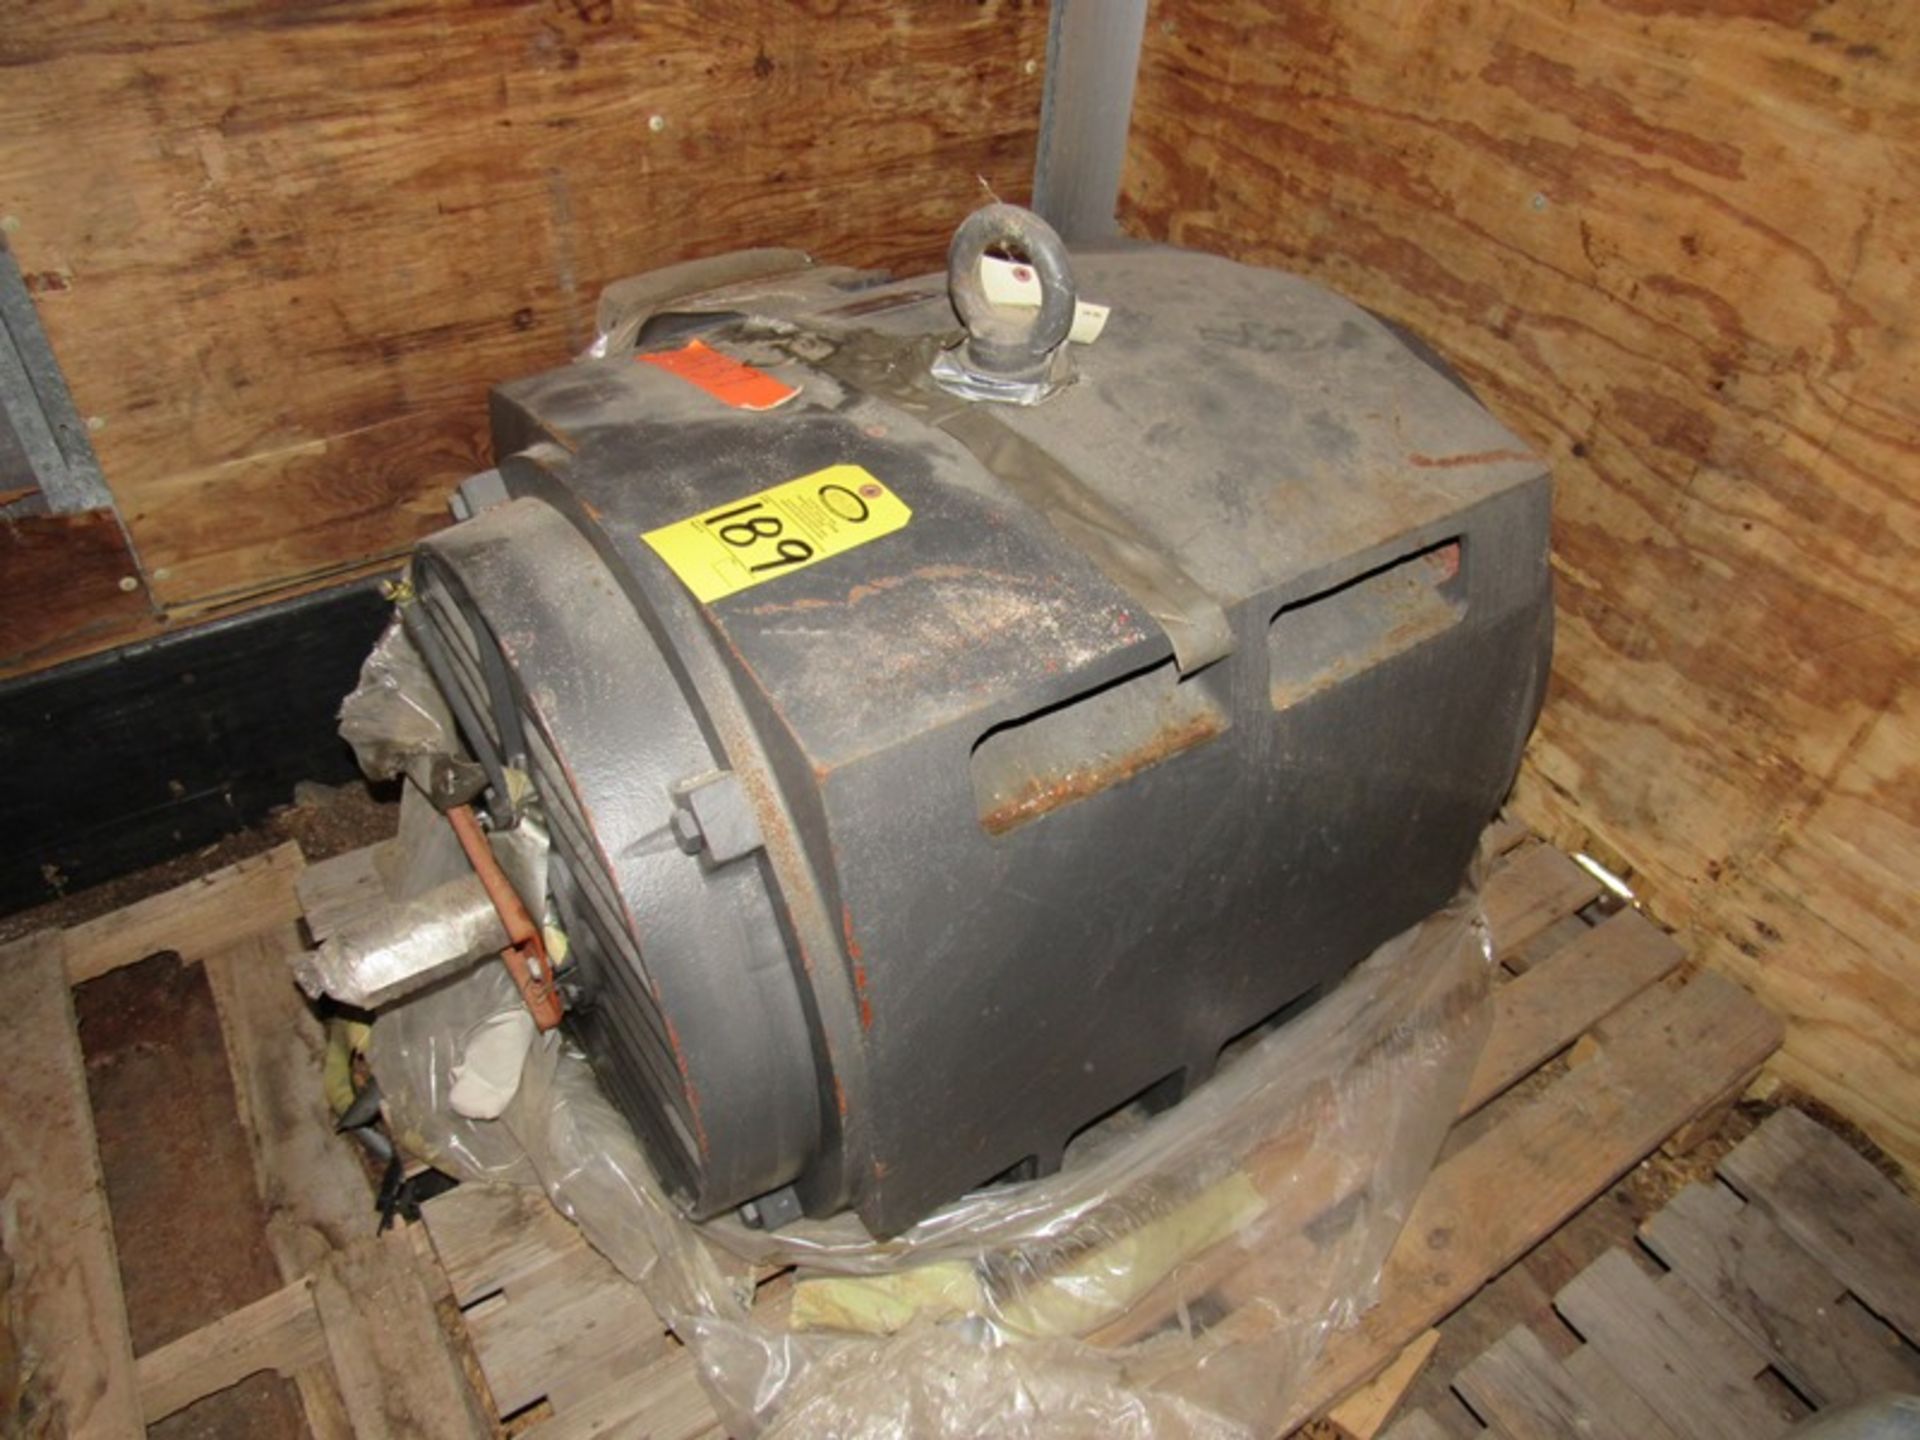 Motor, 450 h.p., 460 volts, 3570 RPM, 505 Amps (Required Loading Fee $150.00 Norm Pavlish-